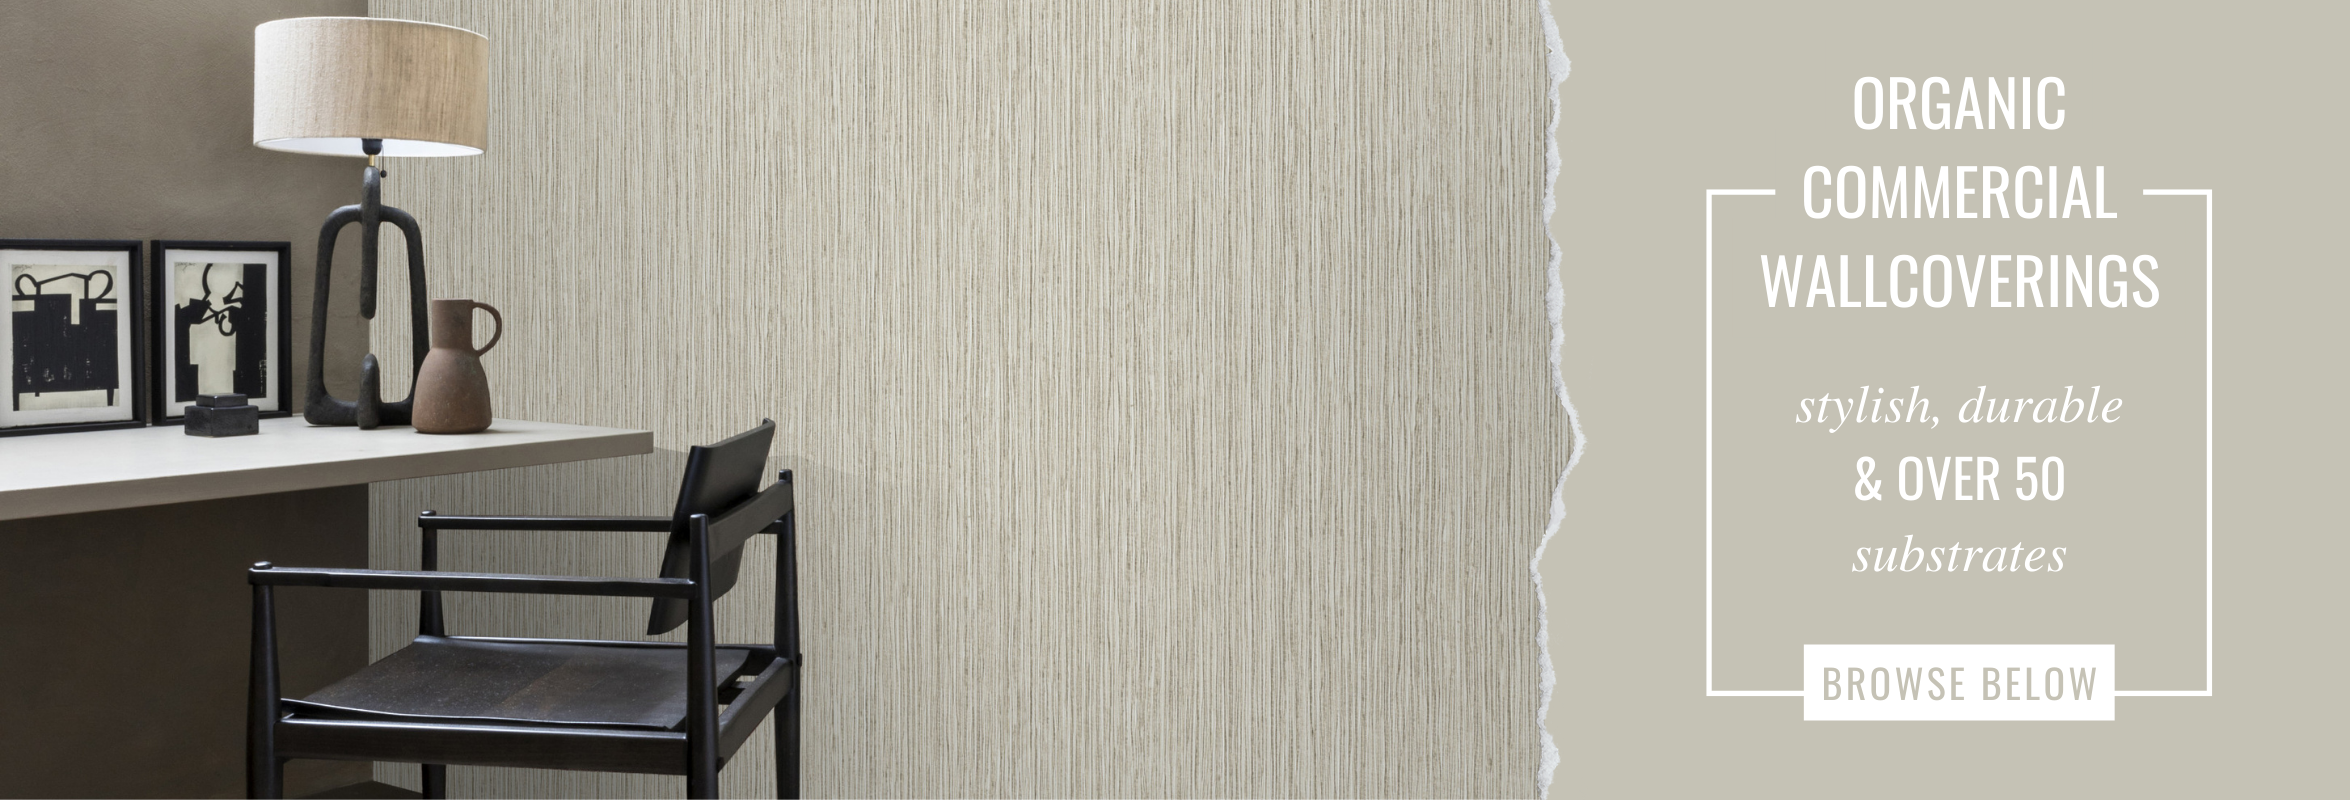 Organic Commercial Wallcoverings